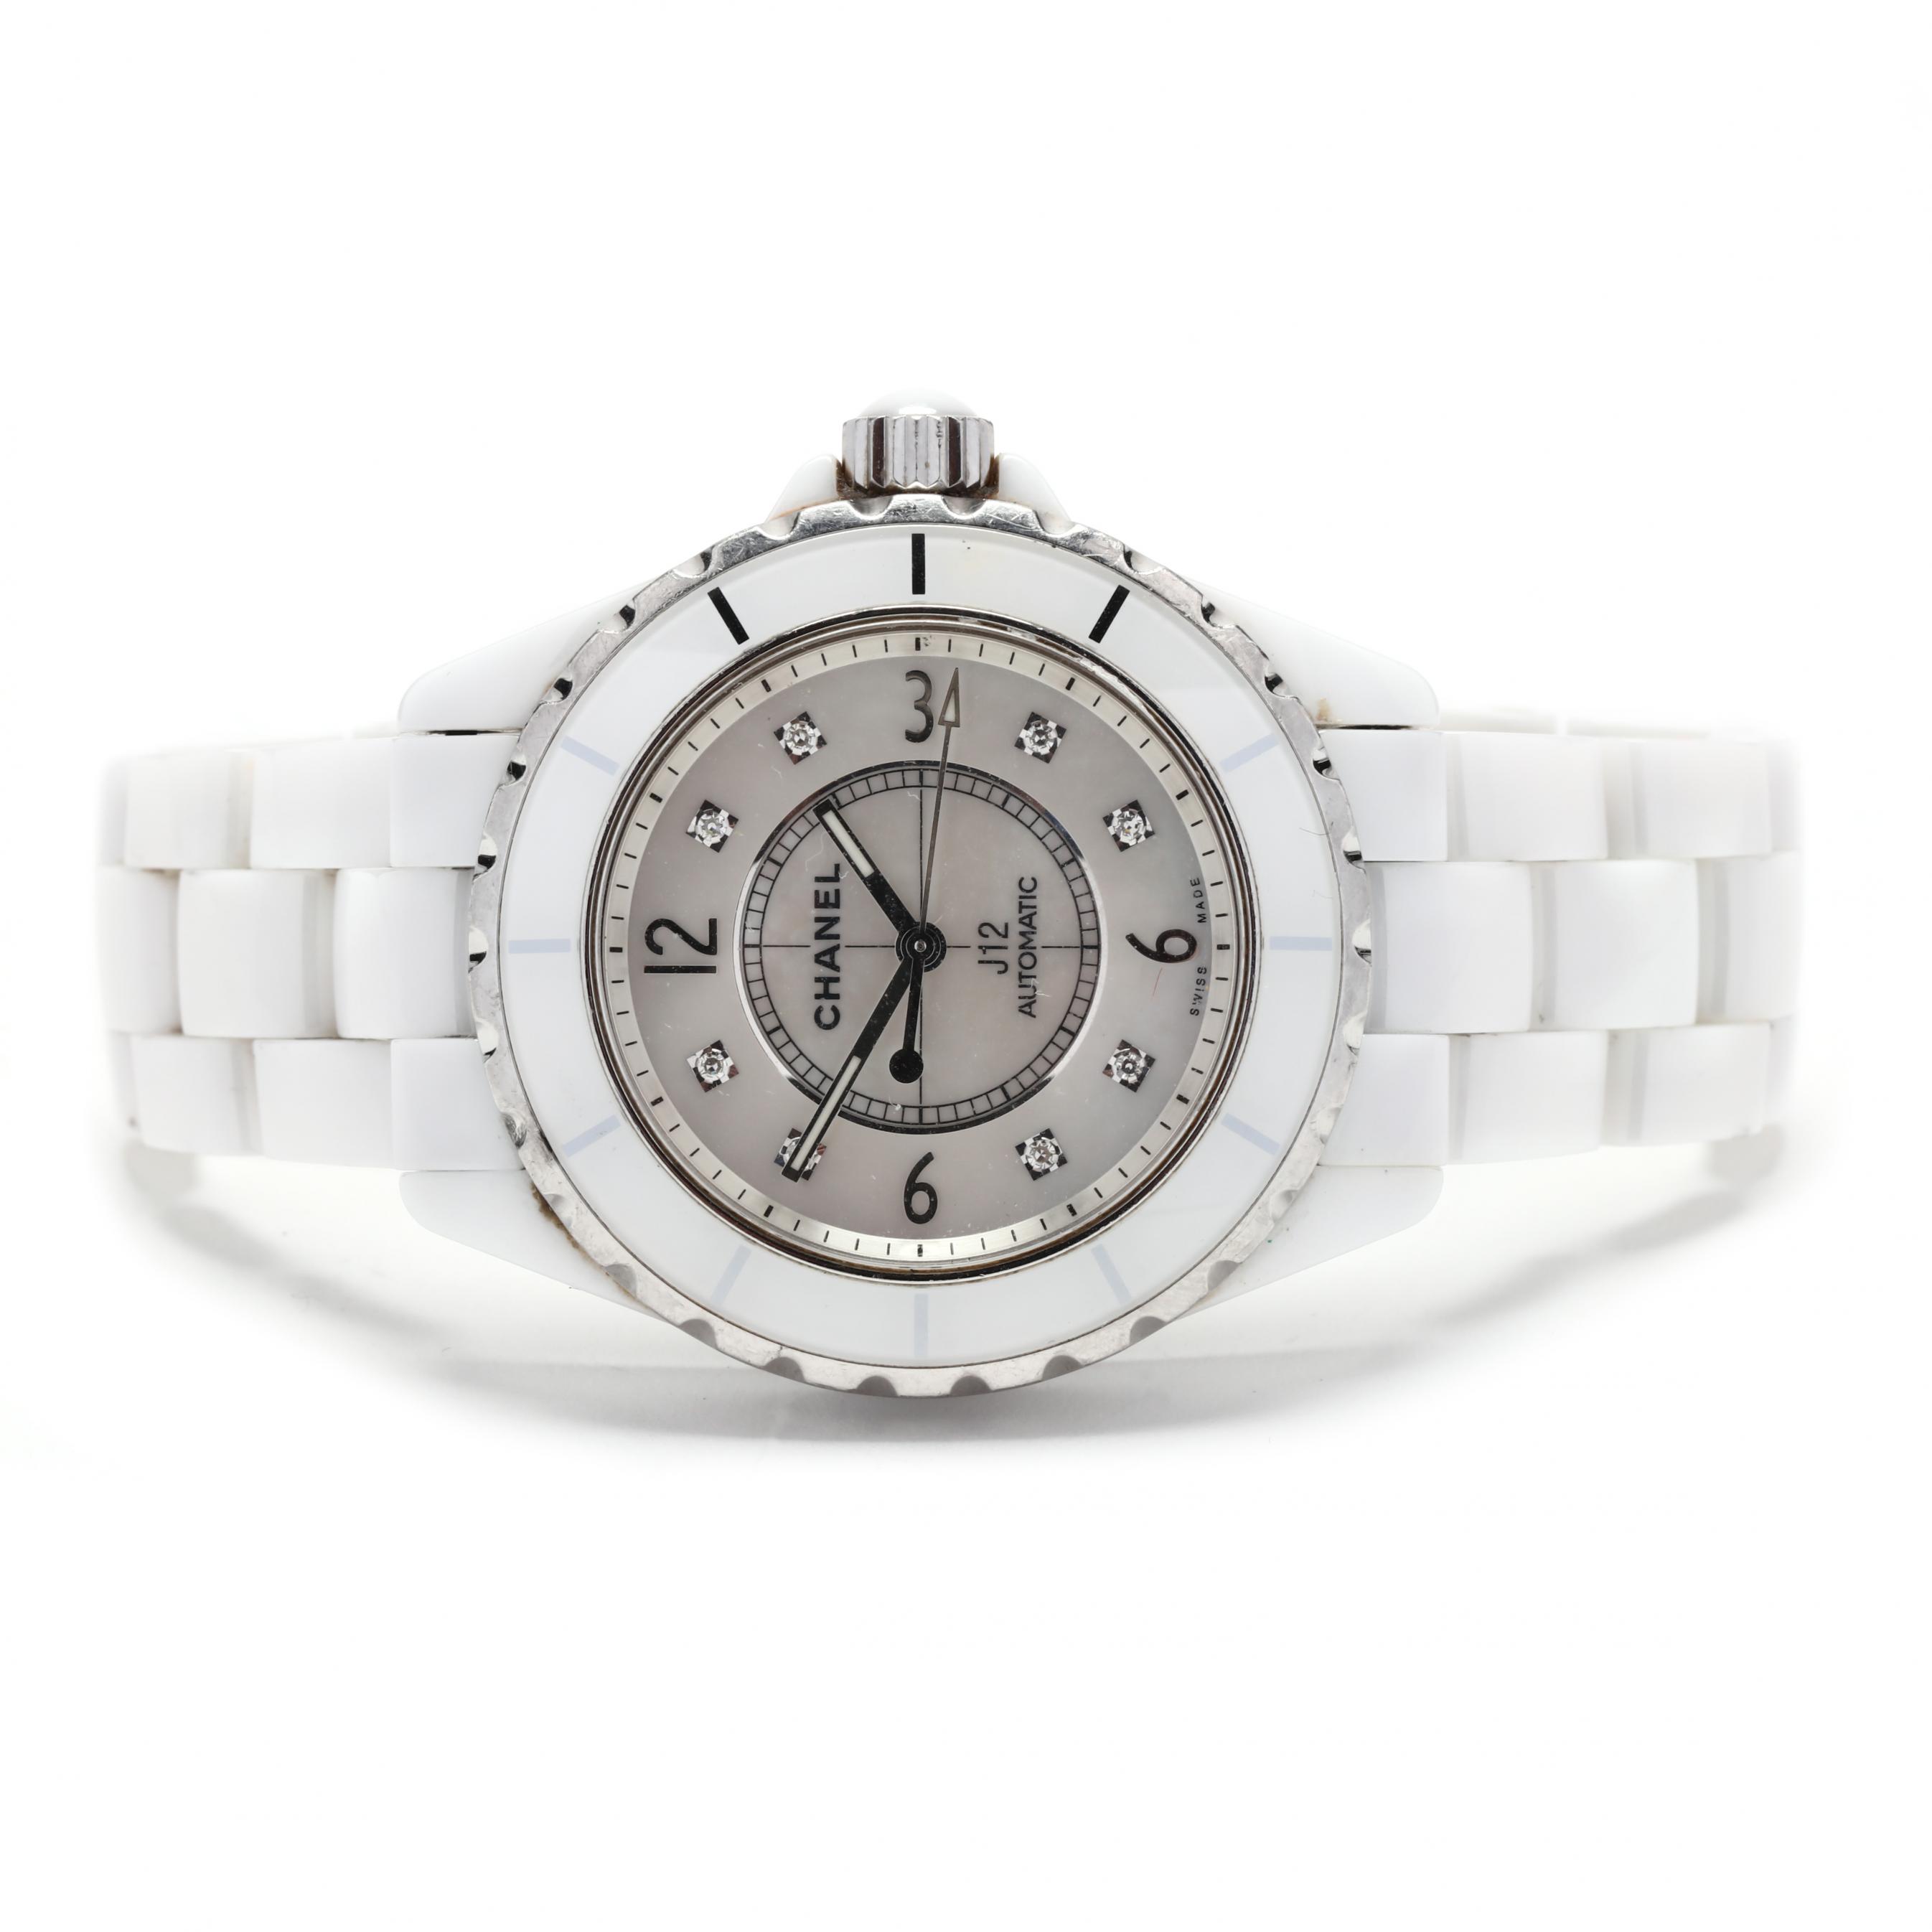 Chanel J12 stainless steel and ceramic watch